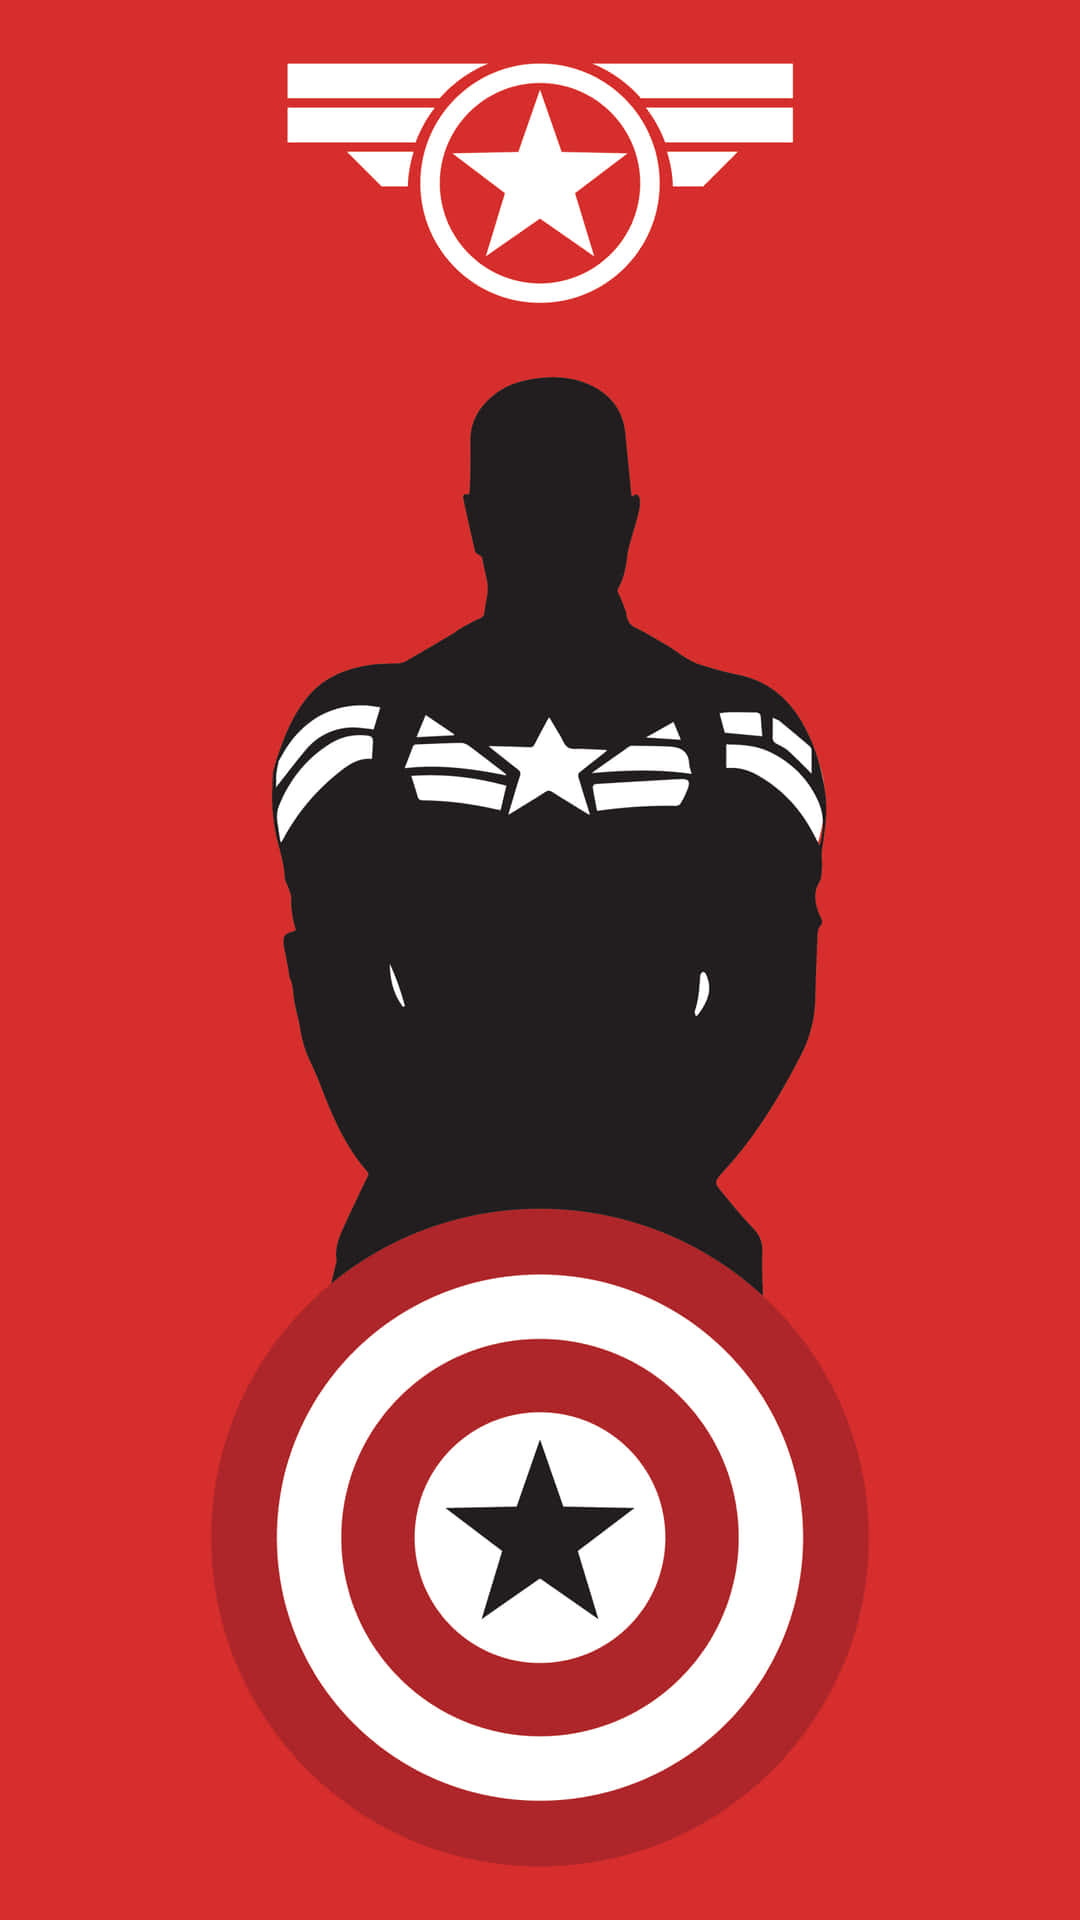 “Feel the power of liberty with Captain America Cool” Wallpaper